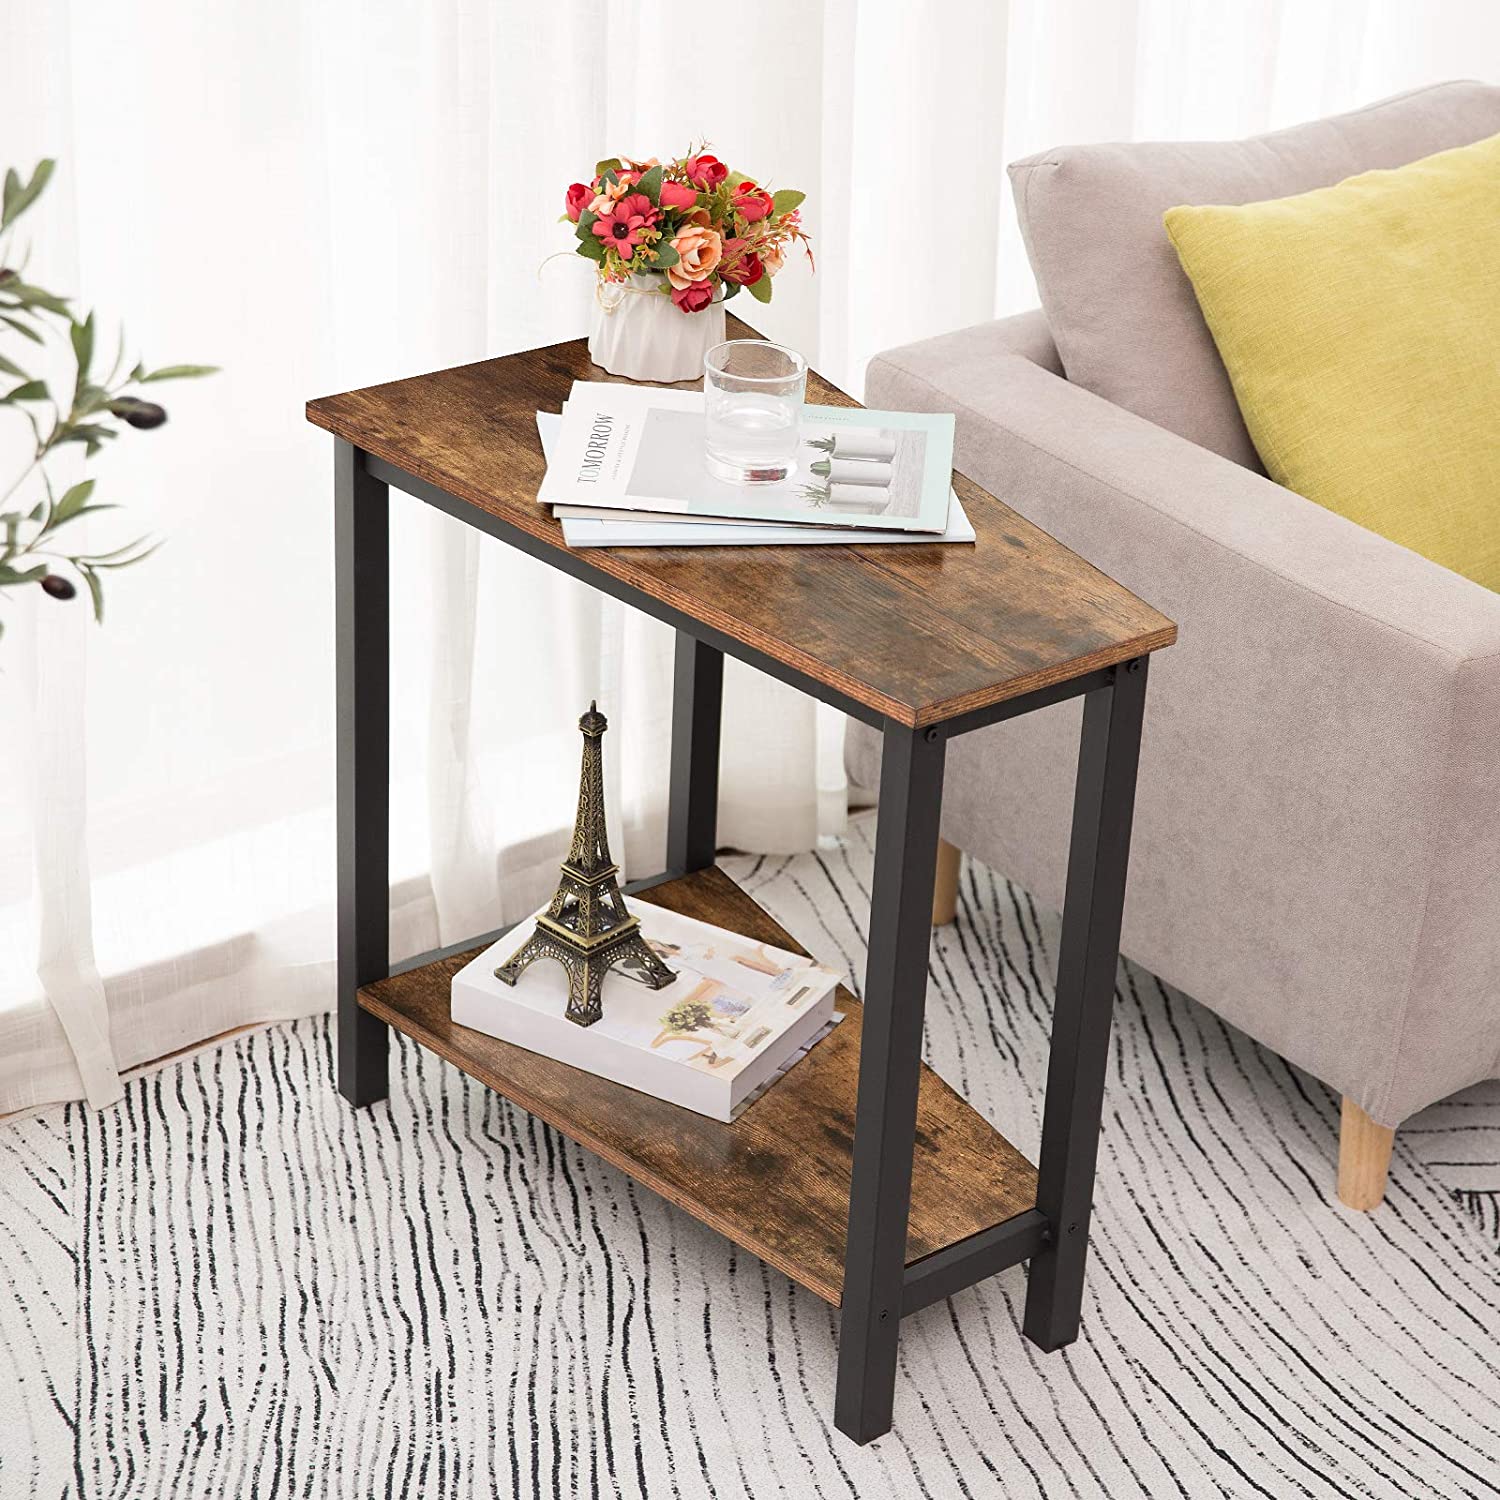 Wedge End Table, Recliner Wedge Side Table